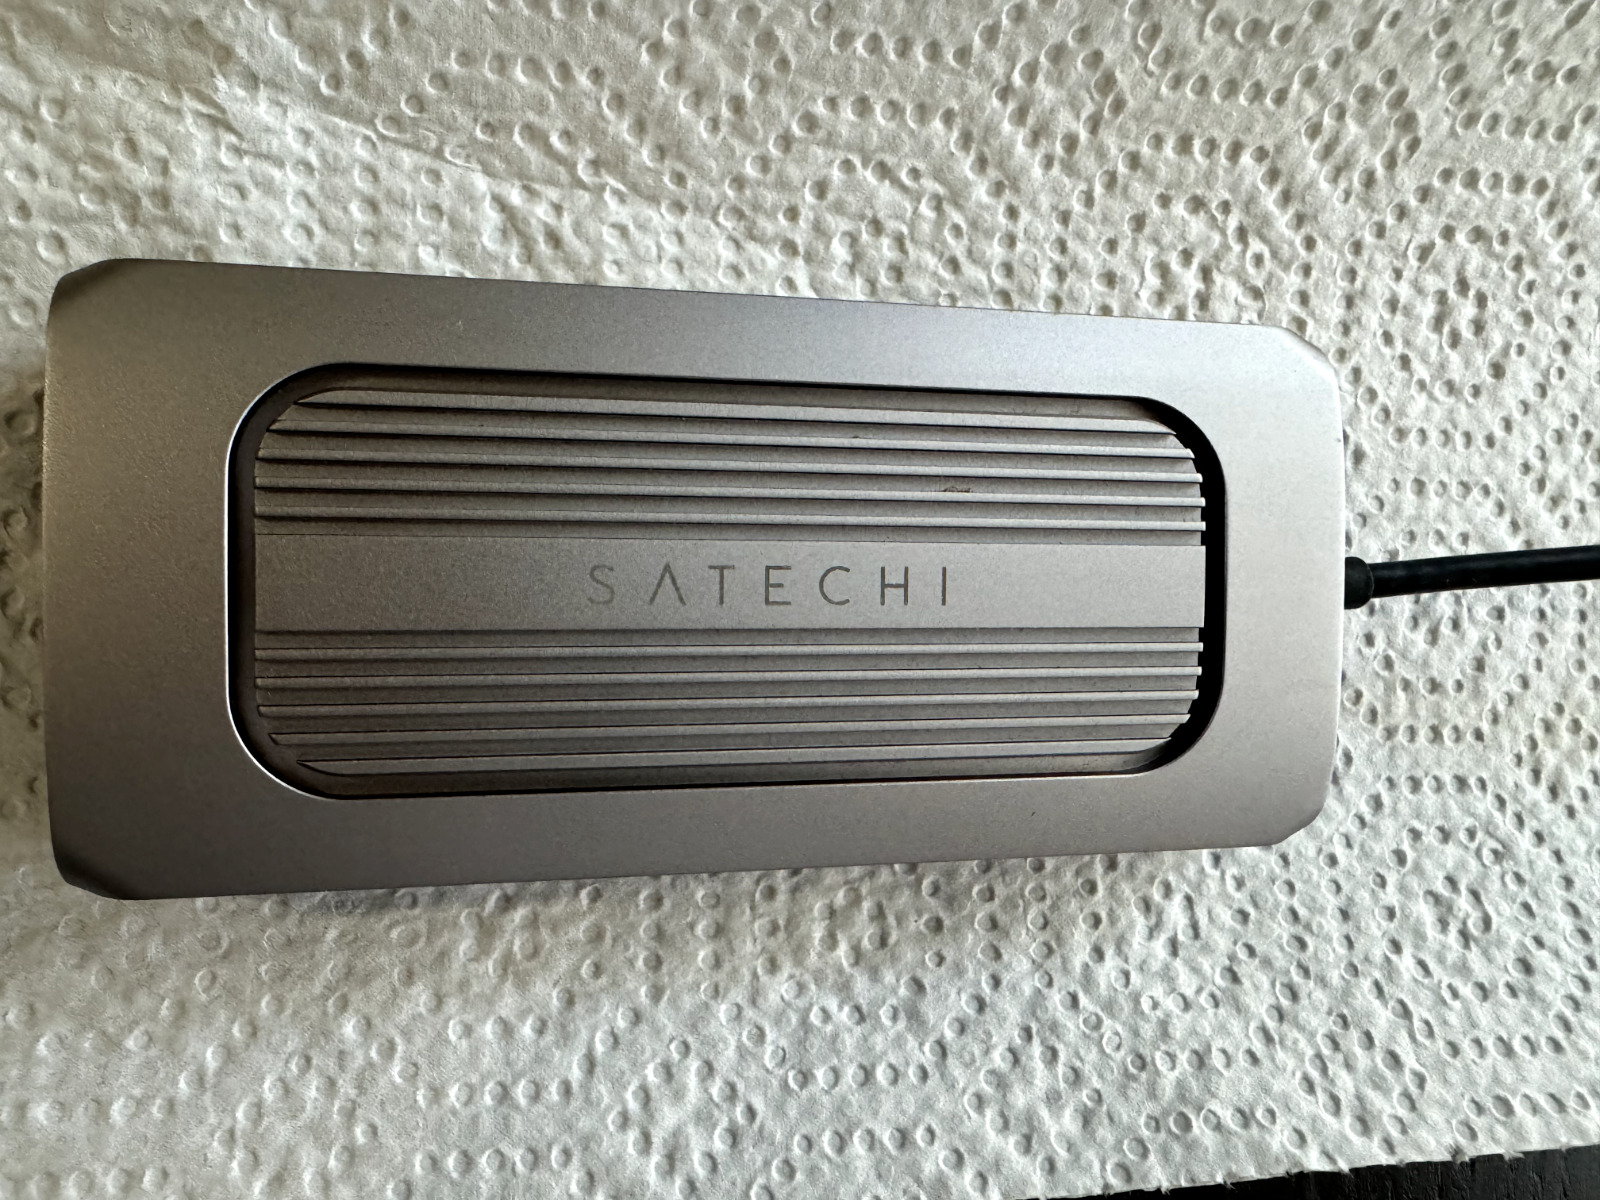 Satechi USB-C Multiport MX Adapter - Space Gray